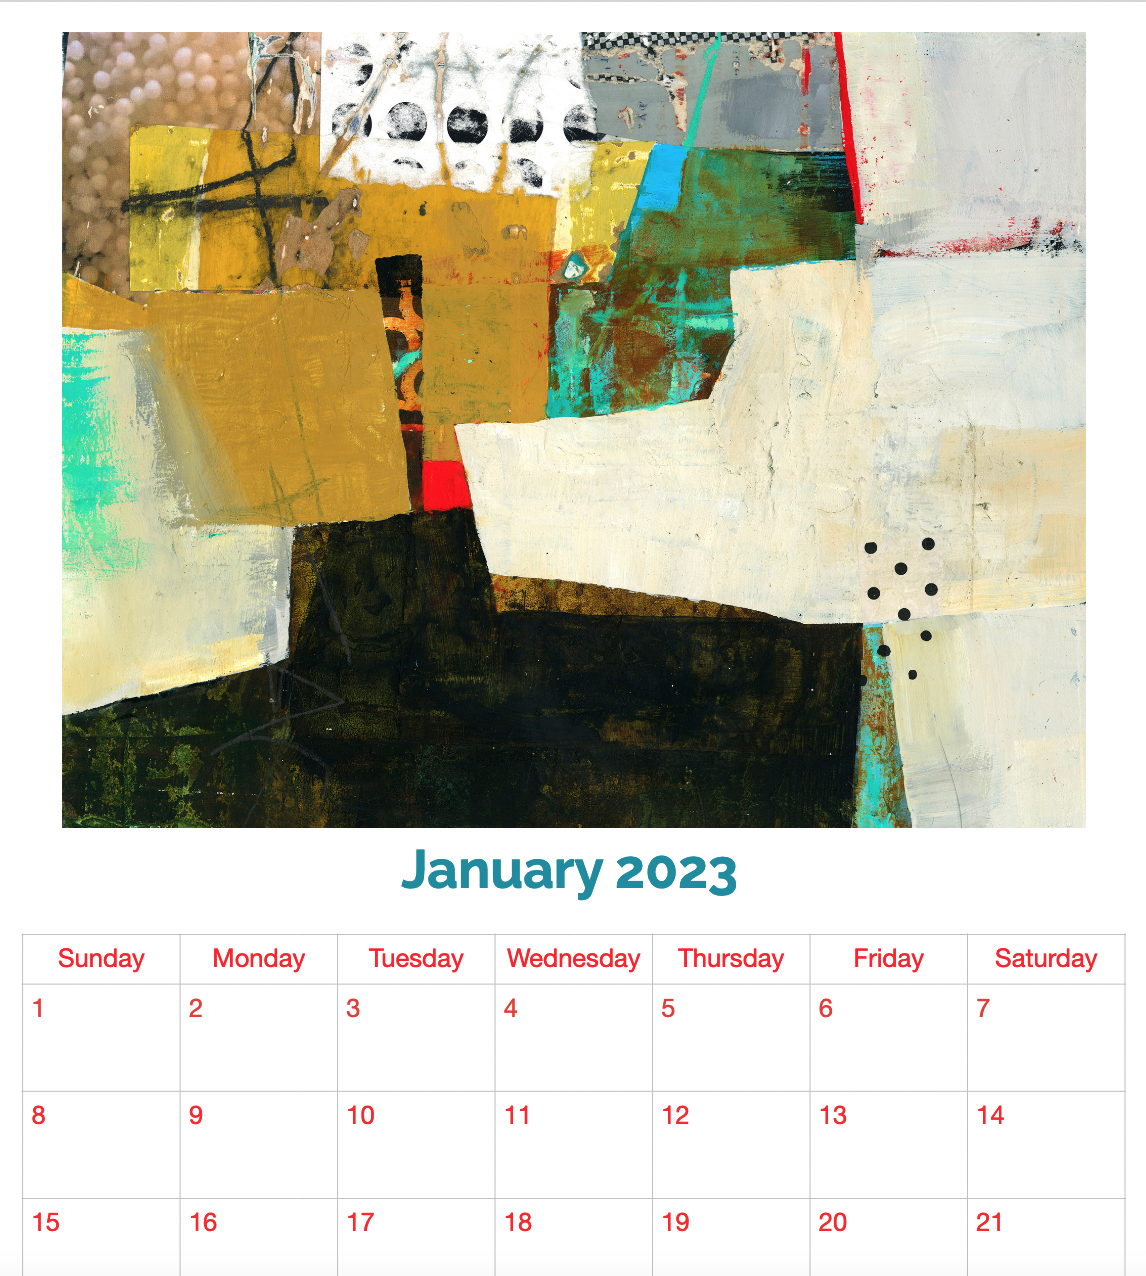 Kars على X: Cover page and January 2022 calendar visual for the